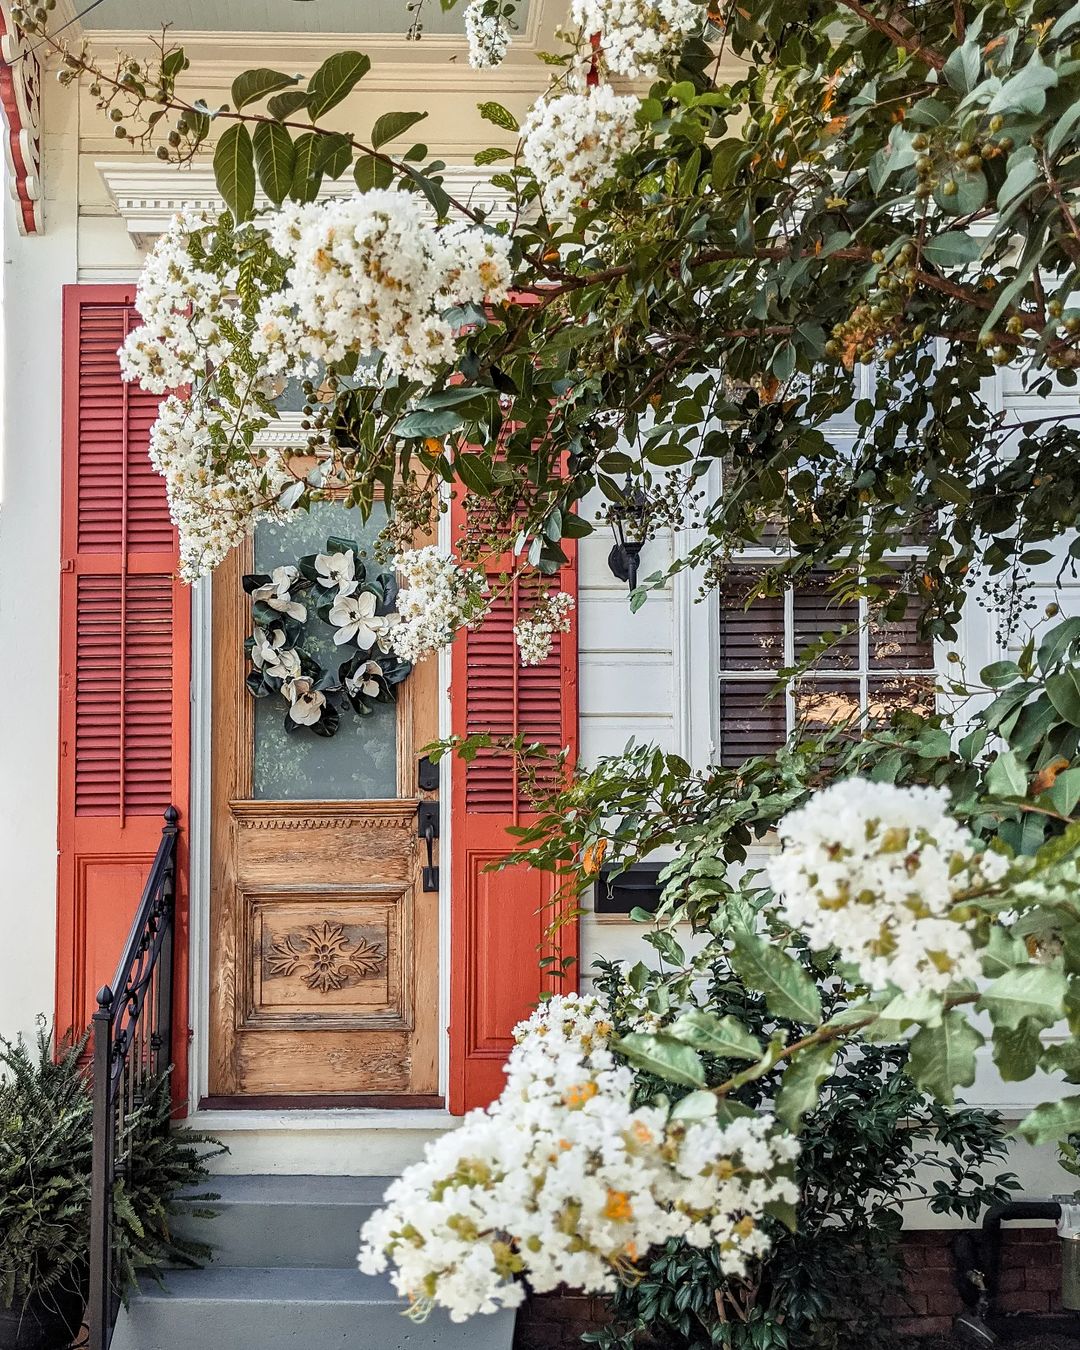 New Orleans style home with bright coral shutters and crepe myrtle tree blooms